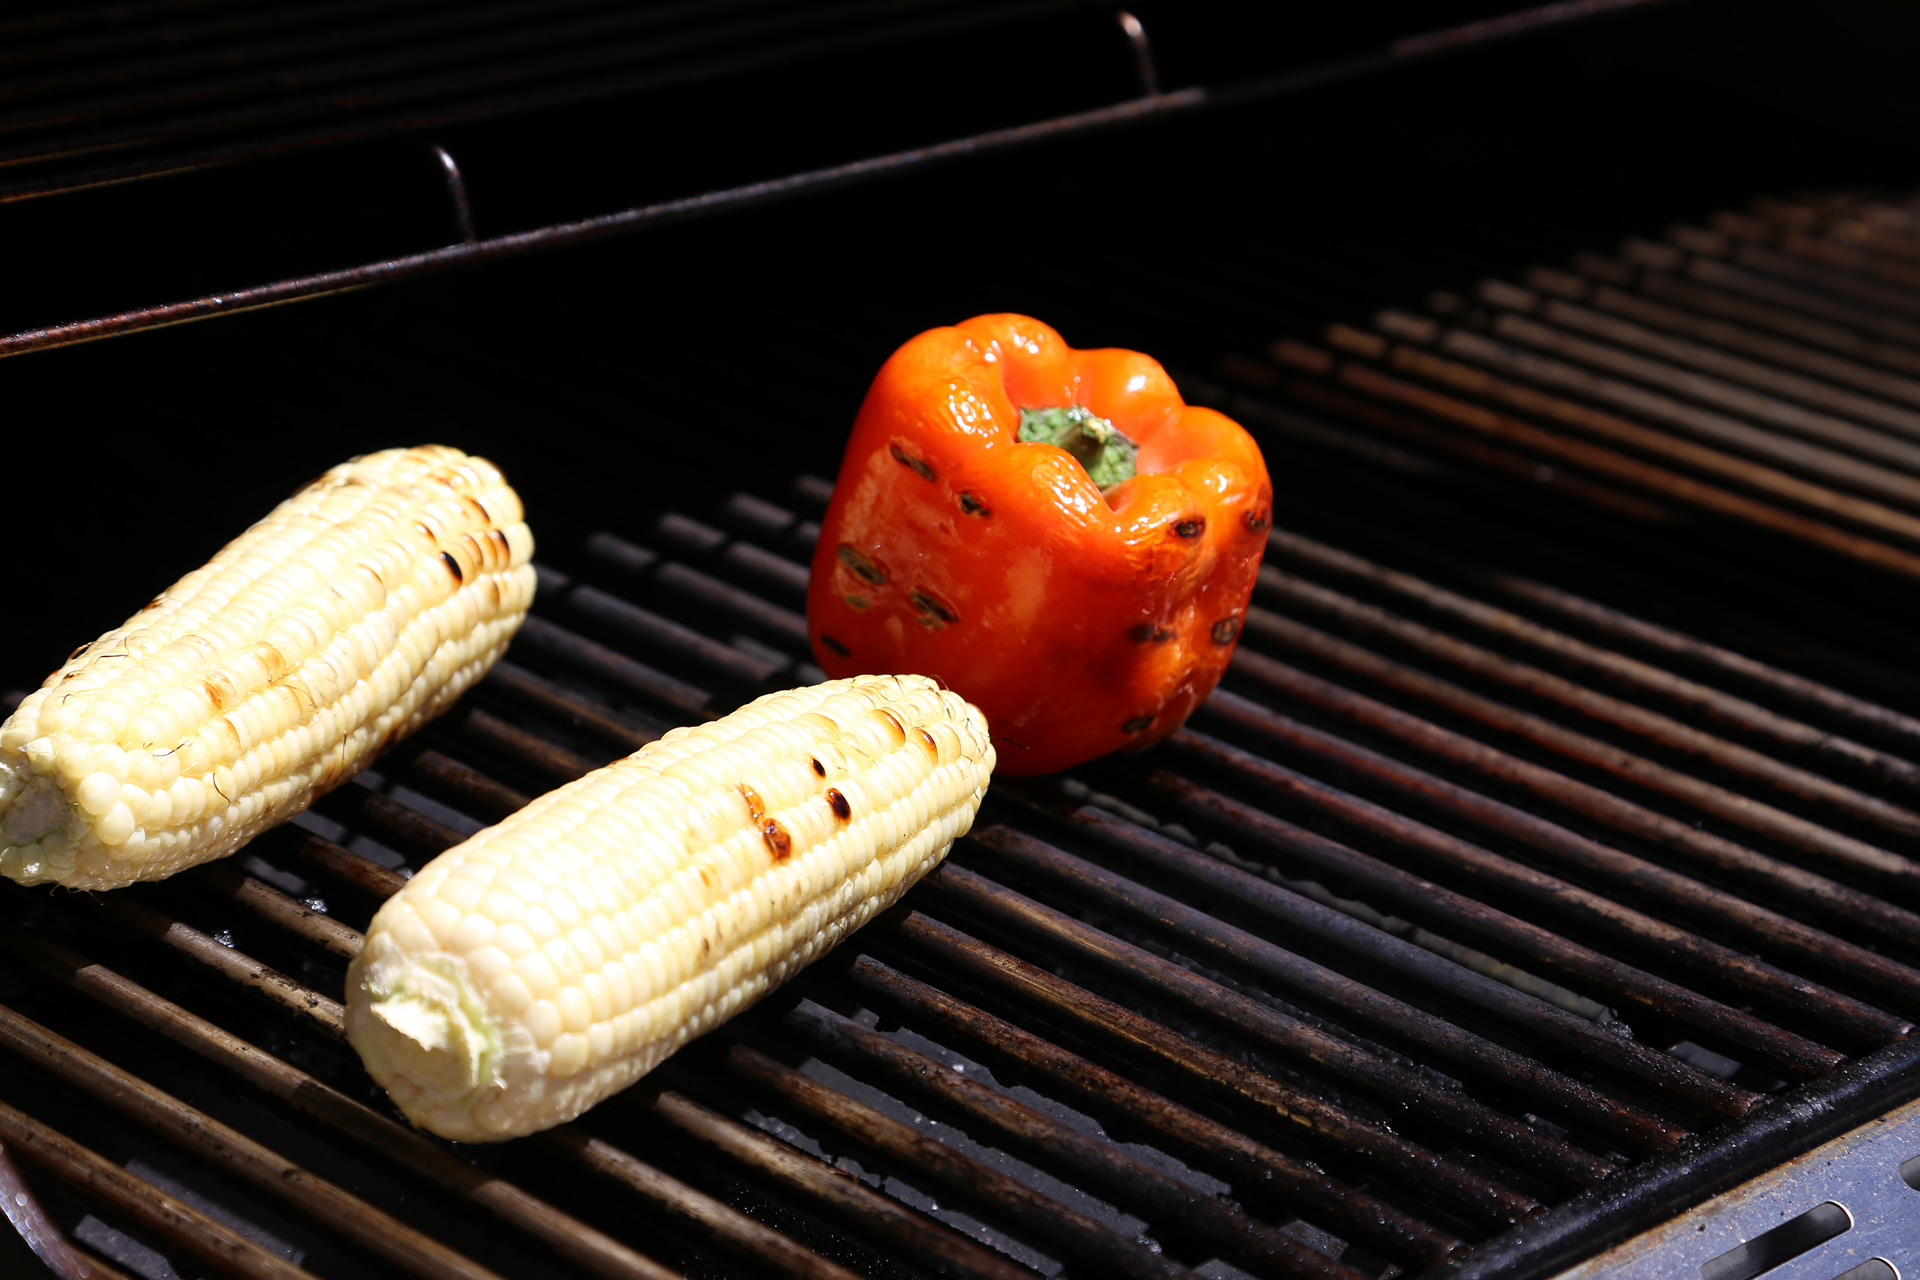 Grill the vegetables until charred.